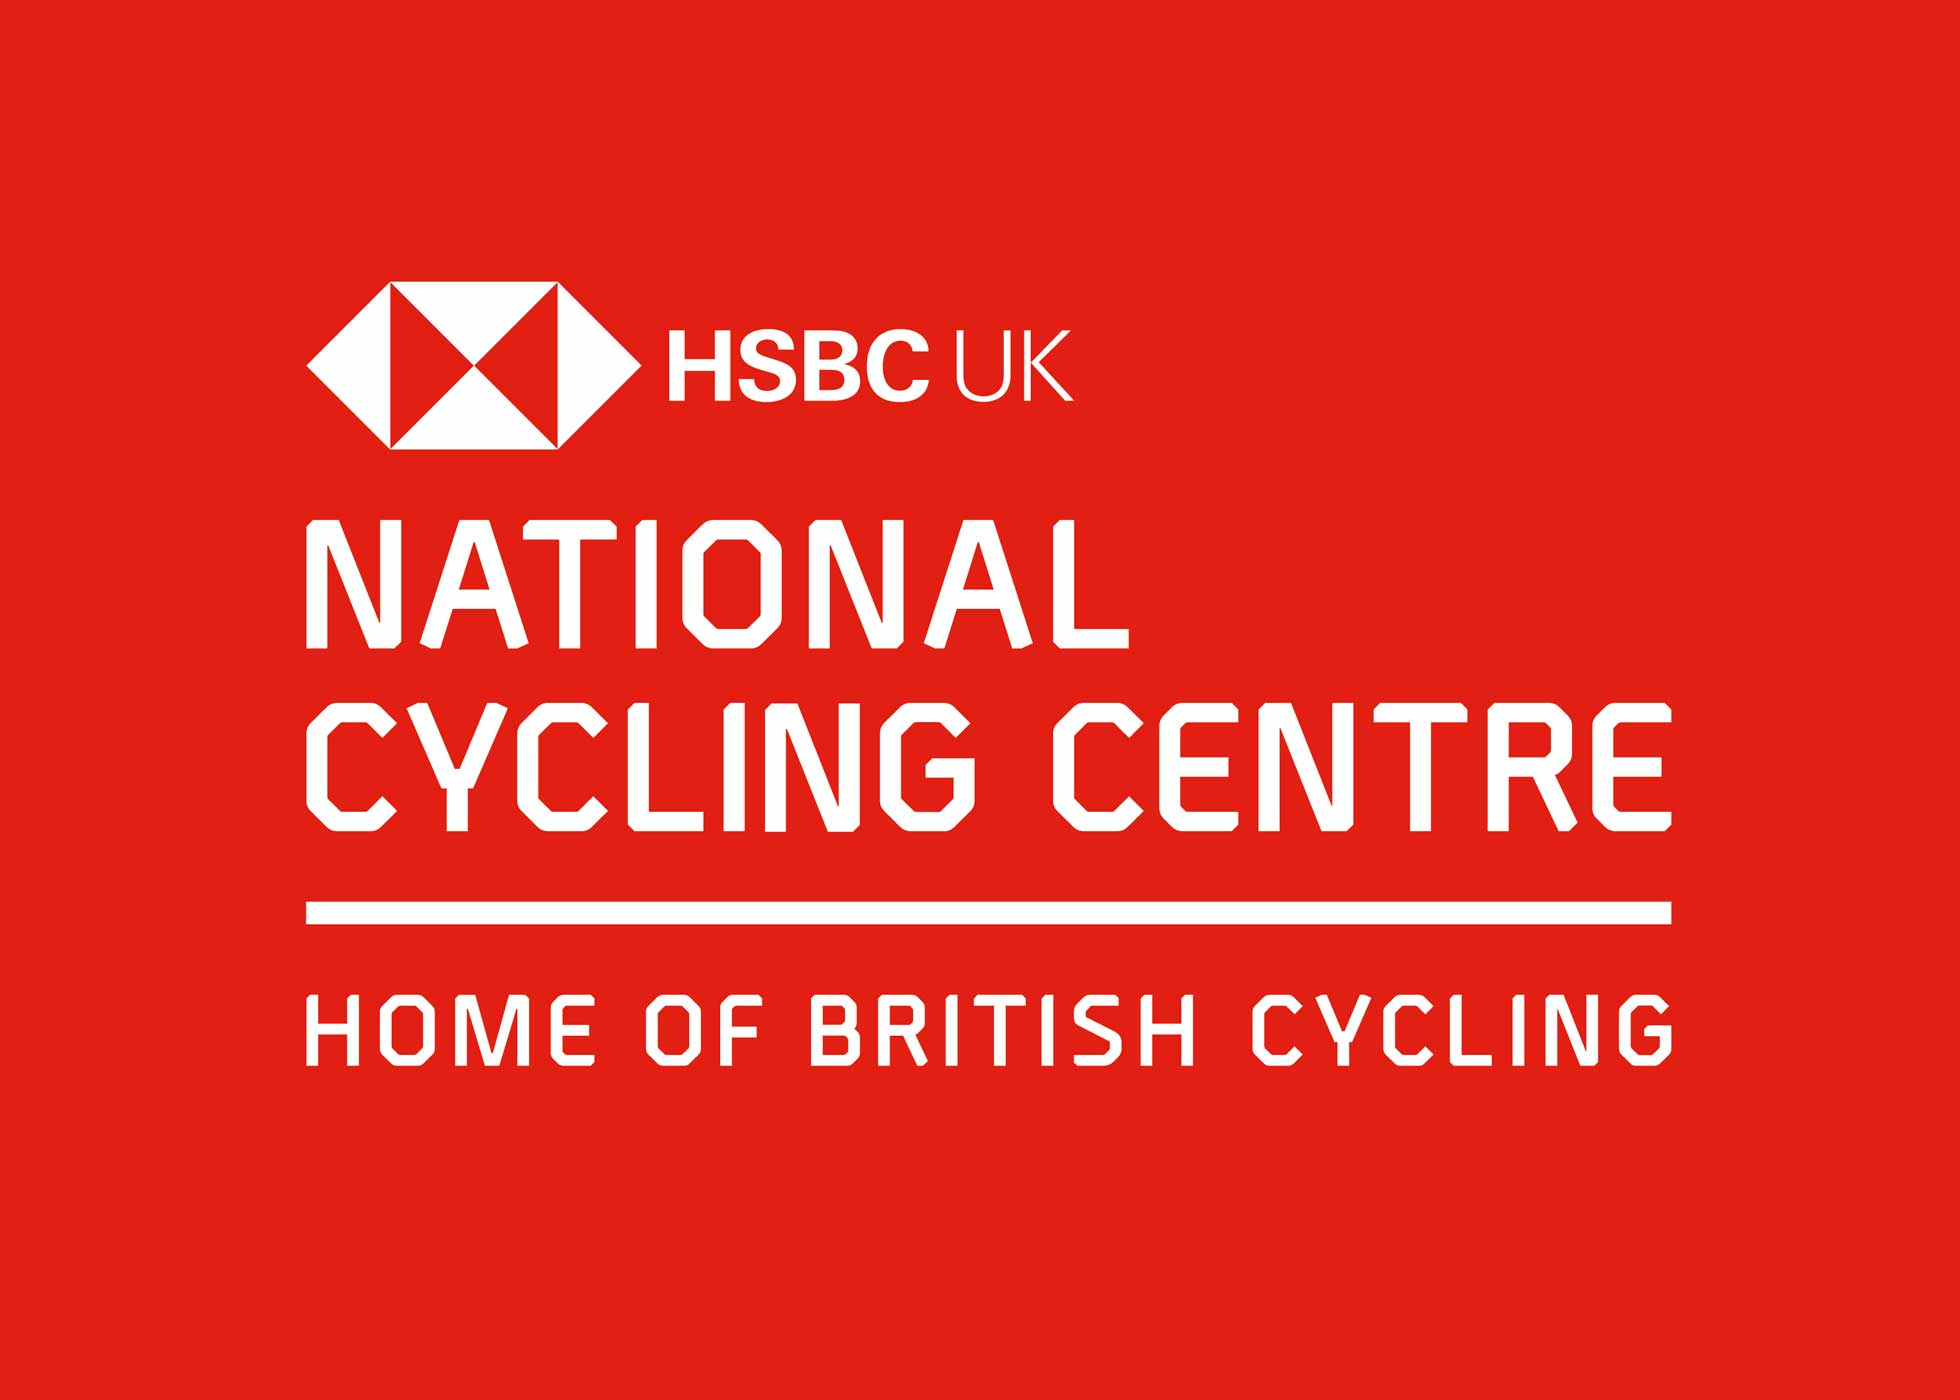 HSBC UK National Cycling Centre Logo On Red Background